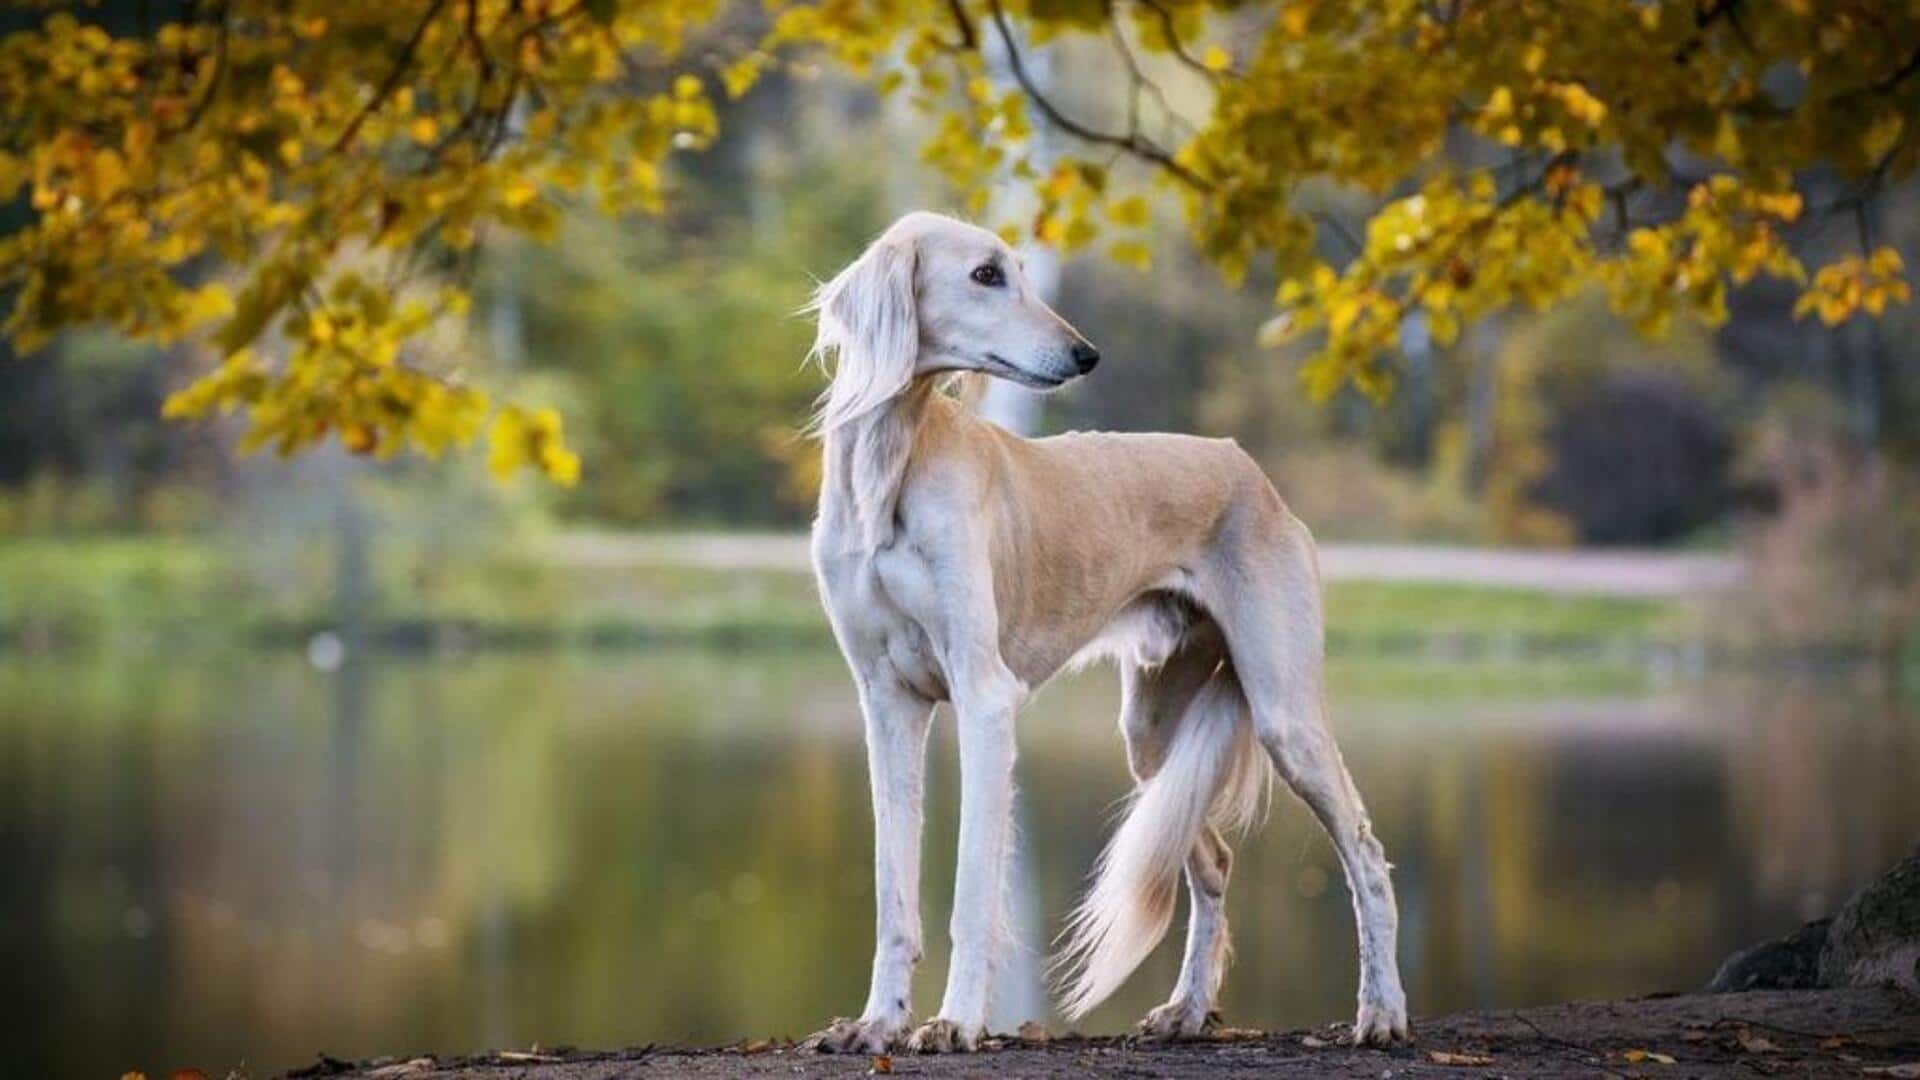 Got a Saluki at home? Note its athletic care tips